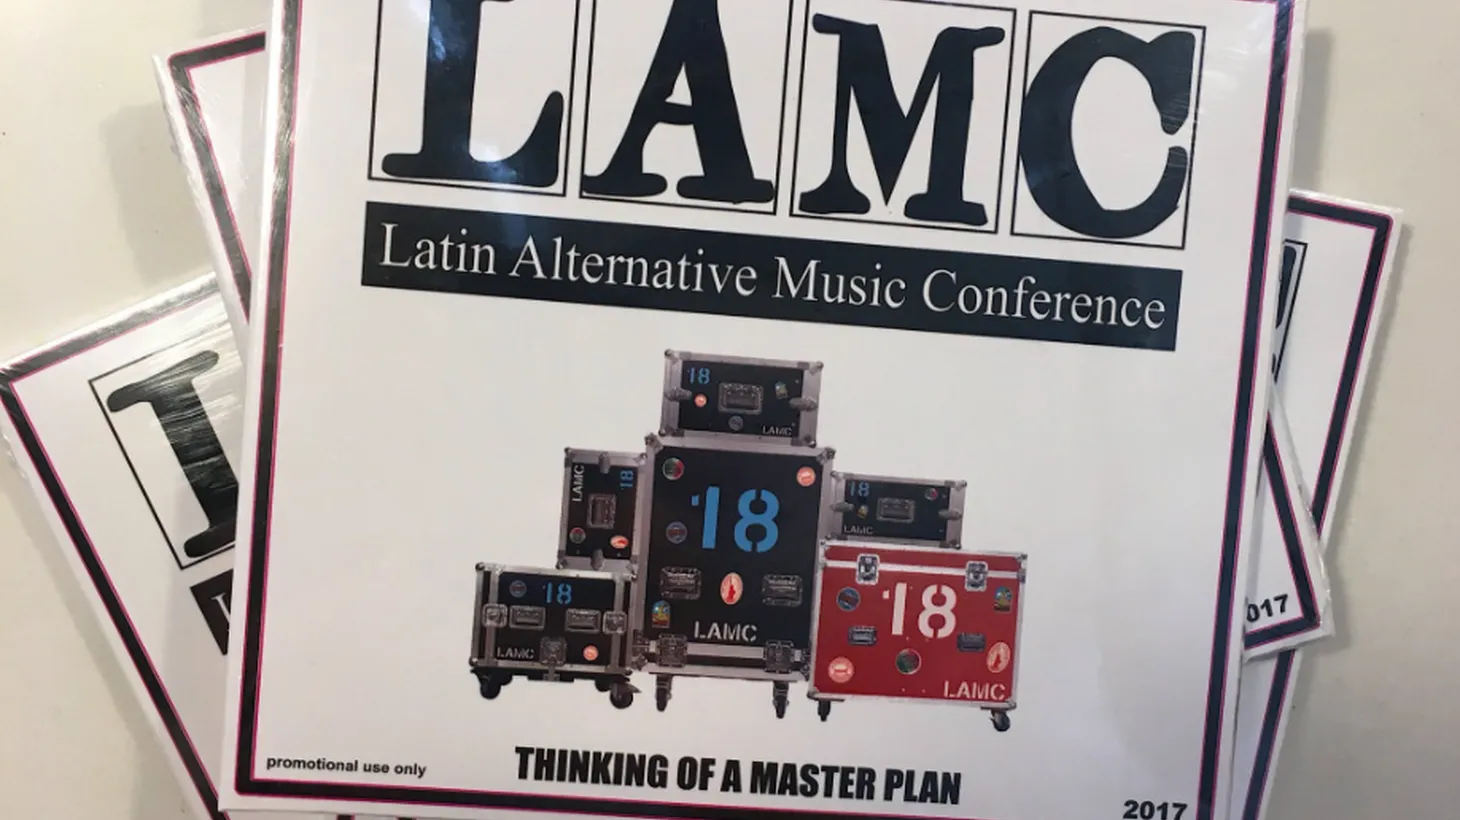 KCRW DJ Raul Campos joins us to share his favorite artist discoveries from the Latin Alternative Music Conference (LAMC) in New York City. (10am)